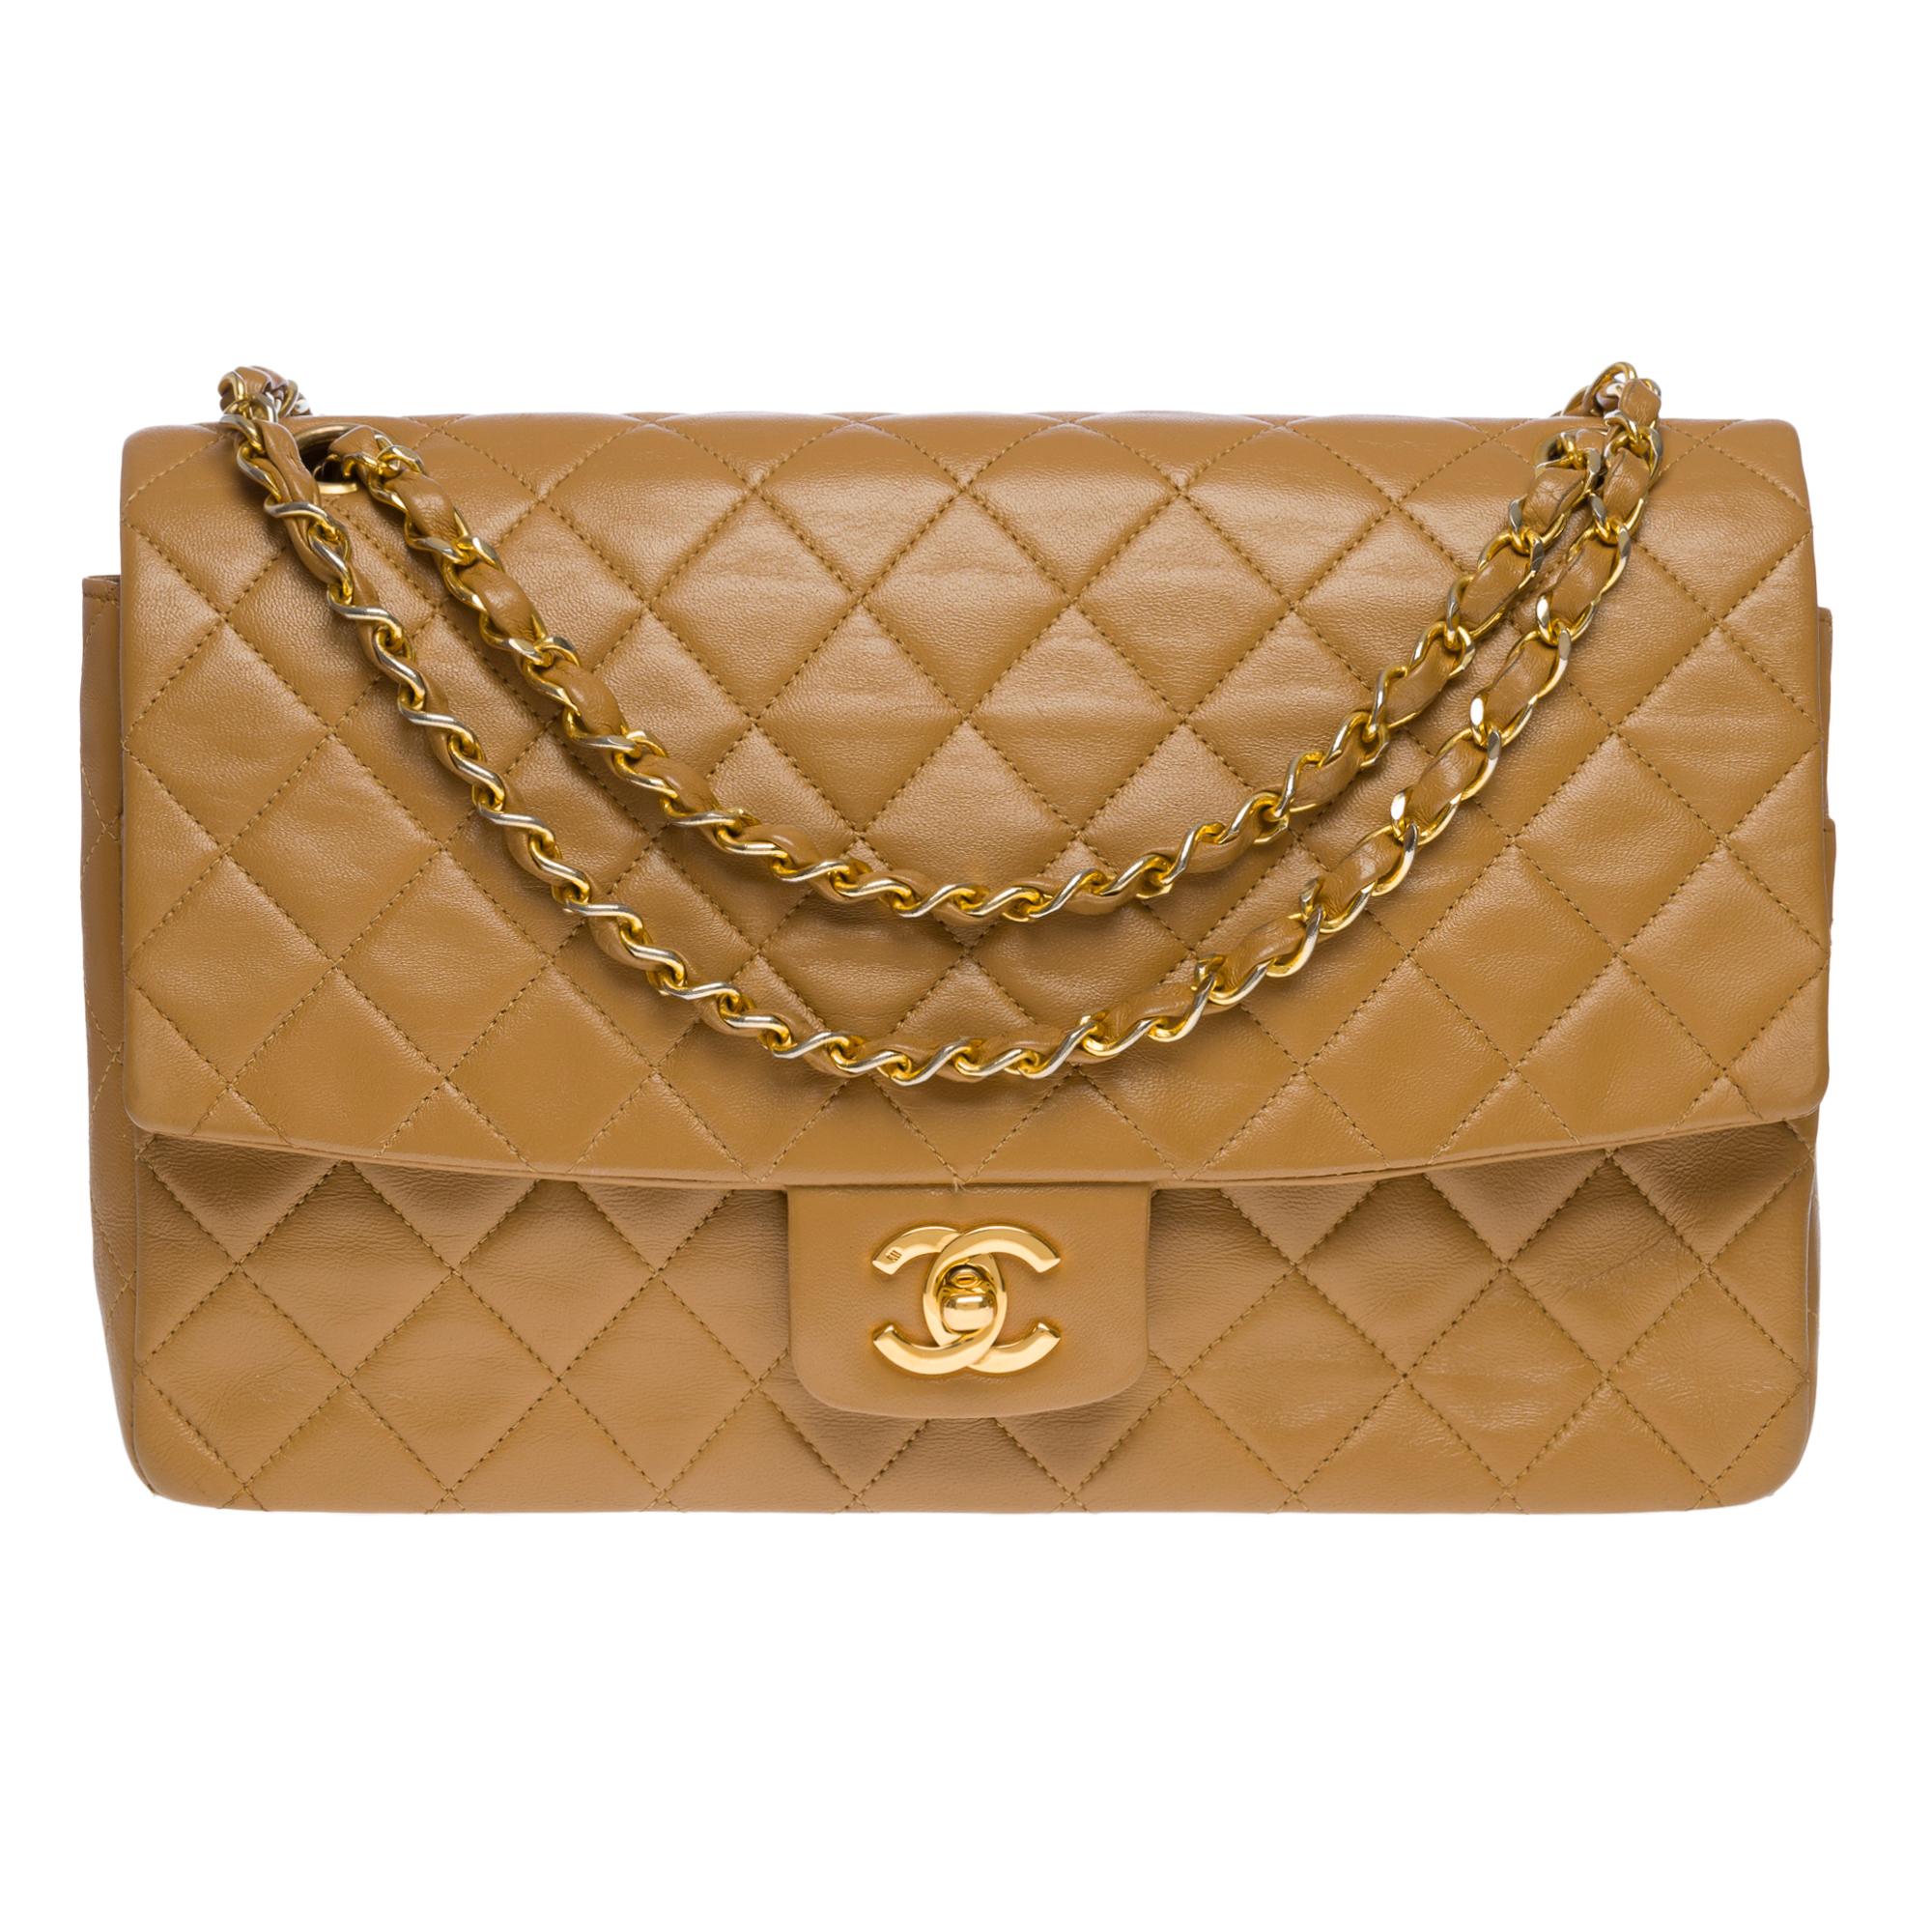 The Classy Chanel Timeless/Classic shoulder flap bag in beige quilted lambskin leather, gold metal hardware, a gold metal chain handle interlaced with beige leather for a shoulder or crossbody carry

Pocket on the back of the bag
Closure by flap,